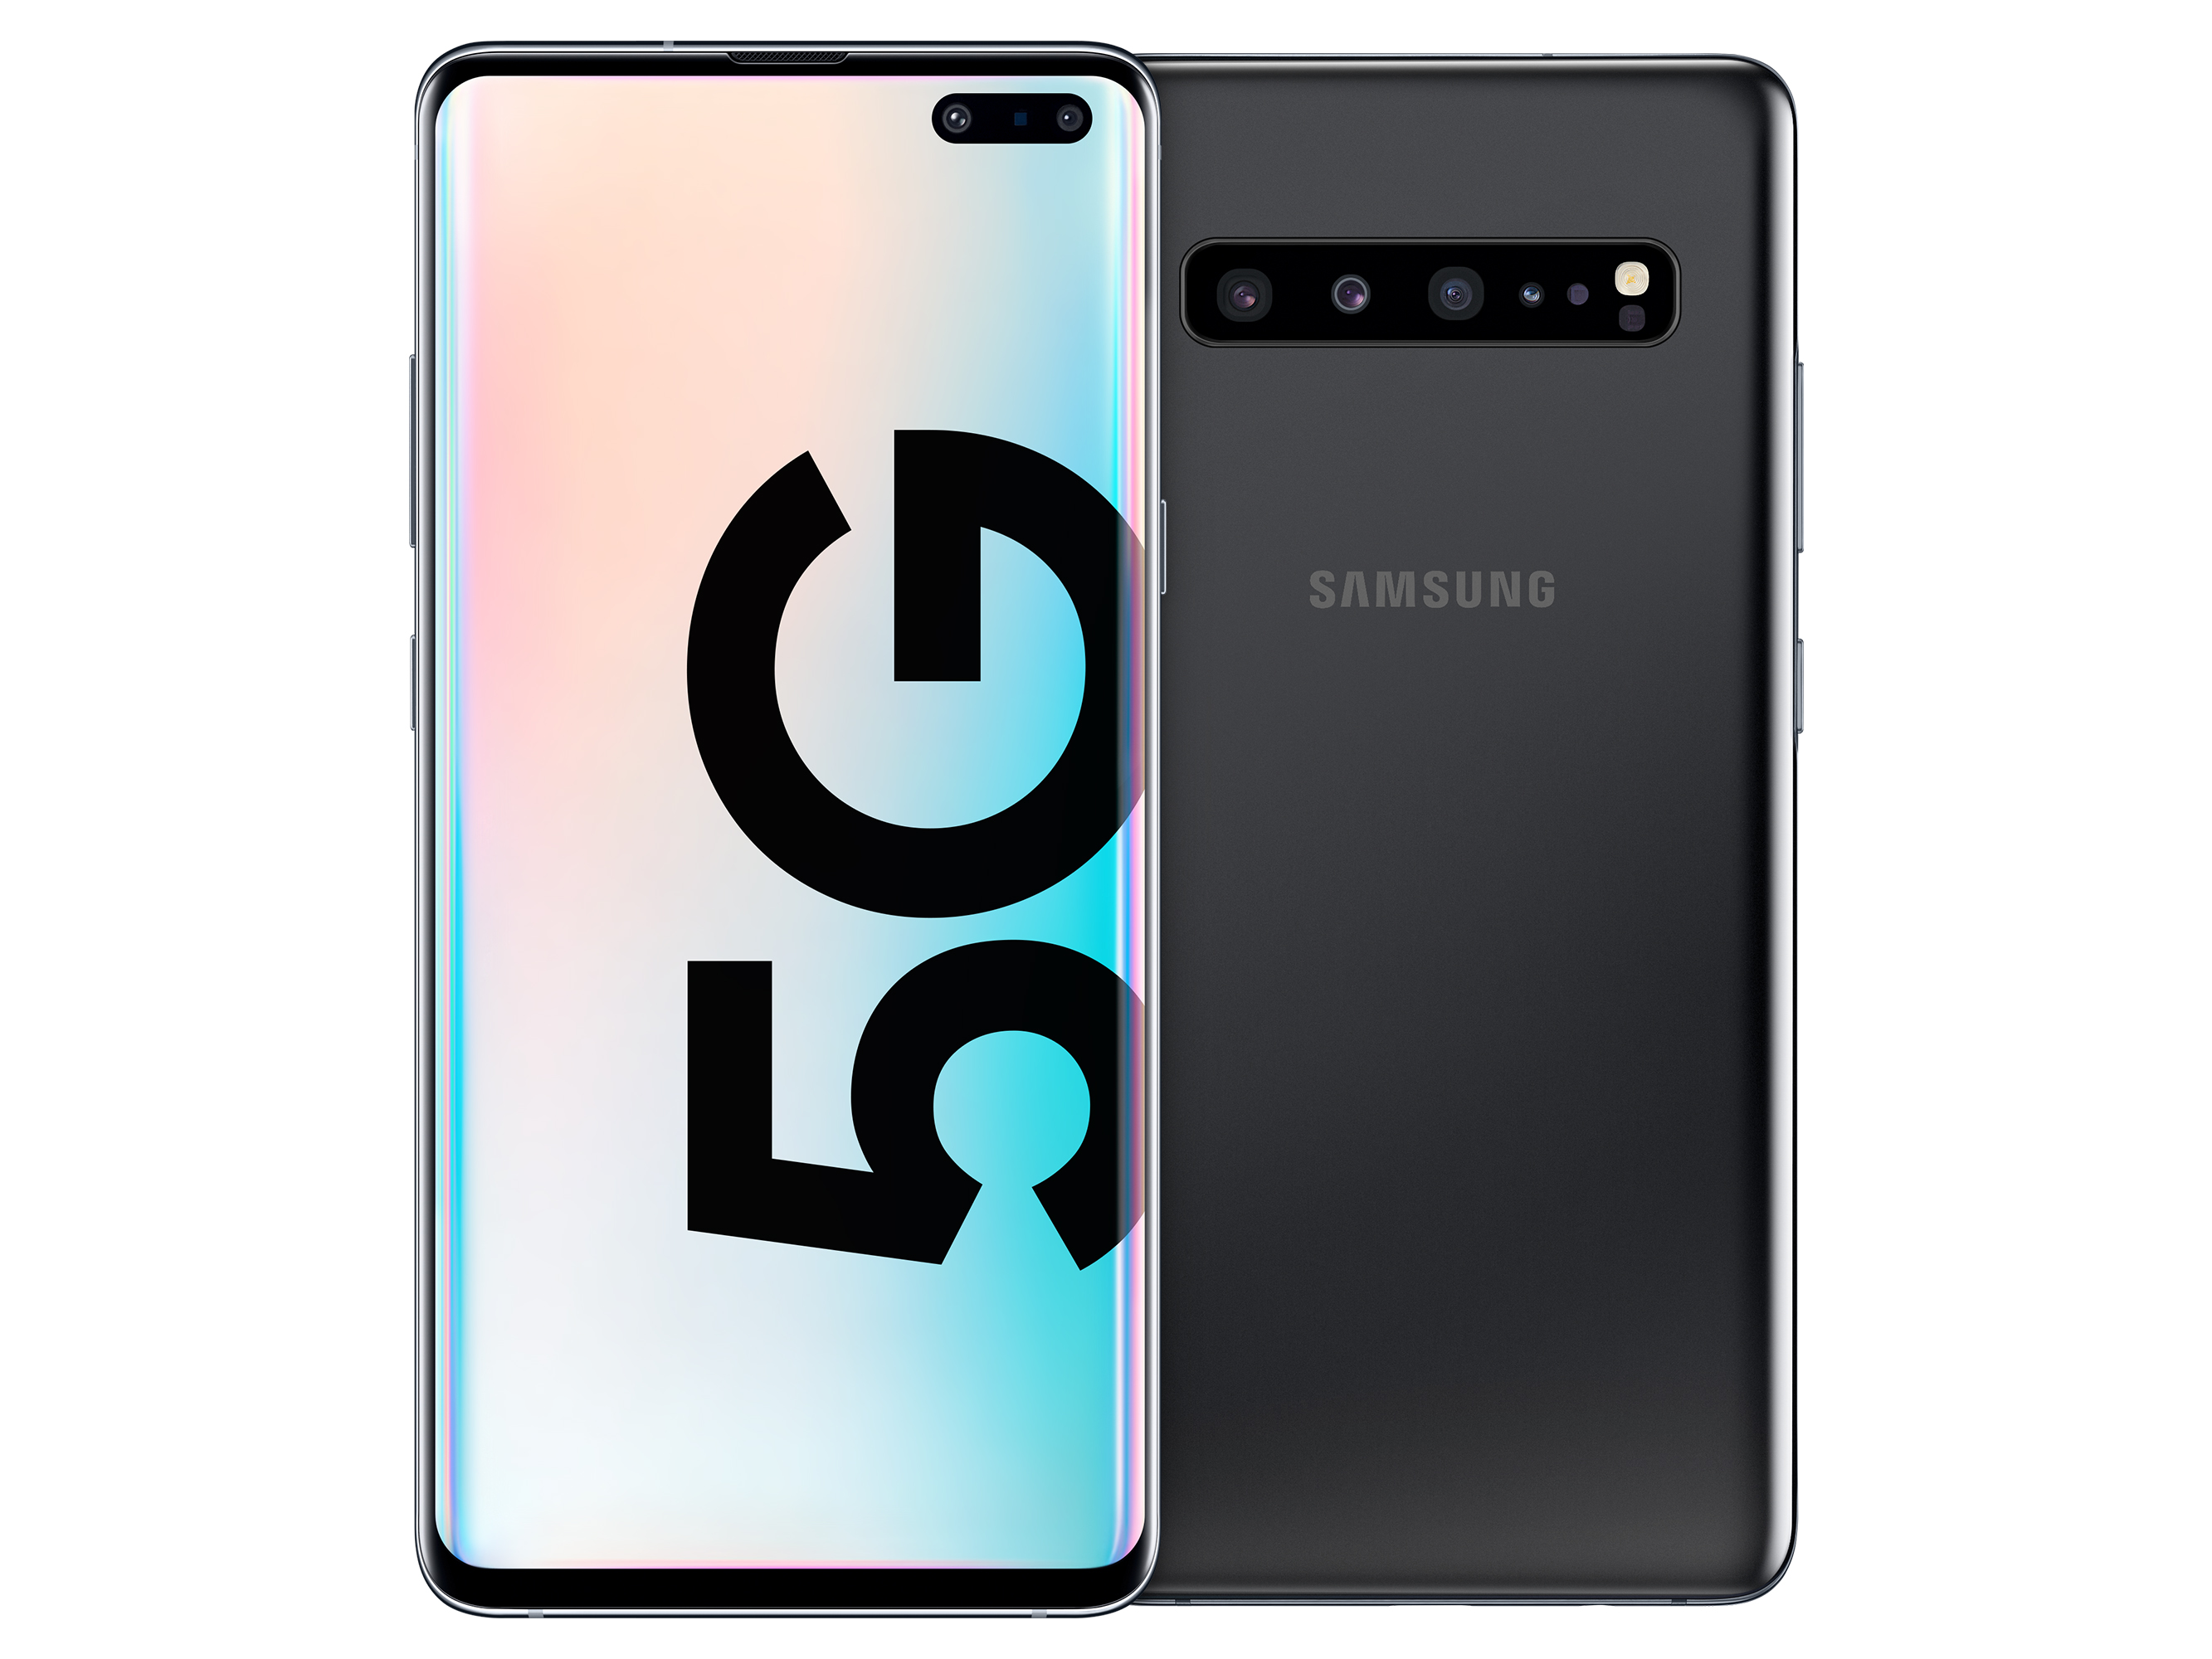 Samsung Galaxy S10 5G Smartphone Review: A turbocharged S10 with a  cutting-edge addition - NotebookCheck.net Reviews